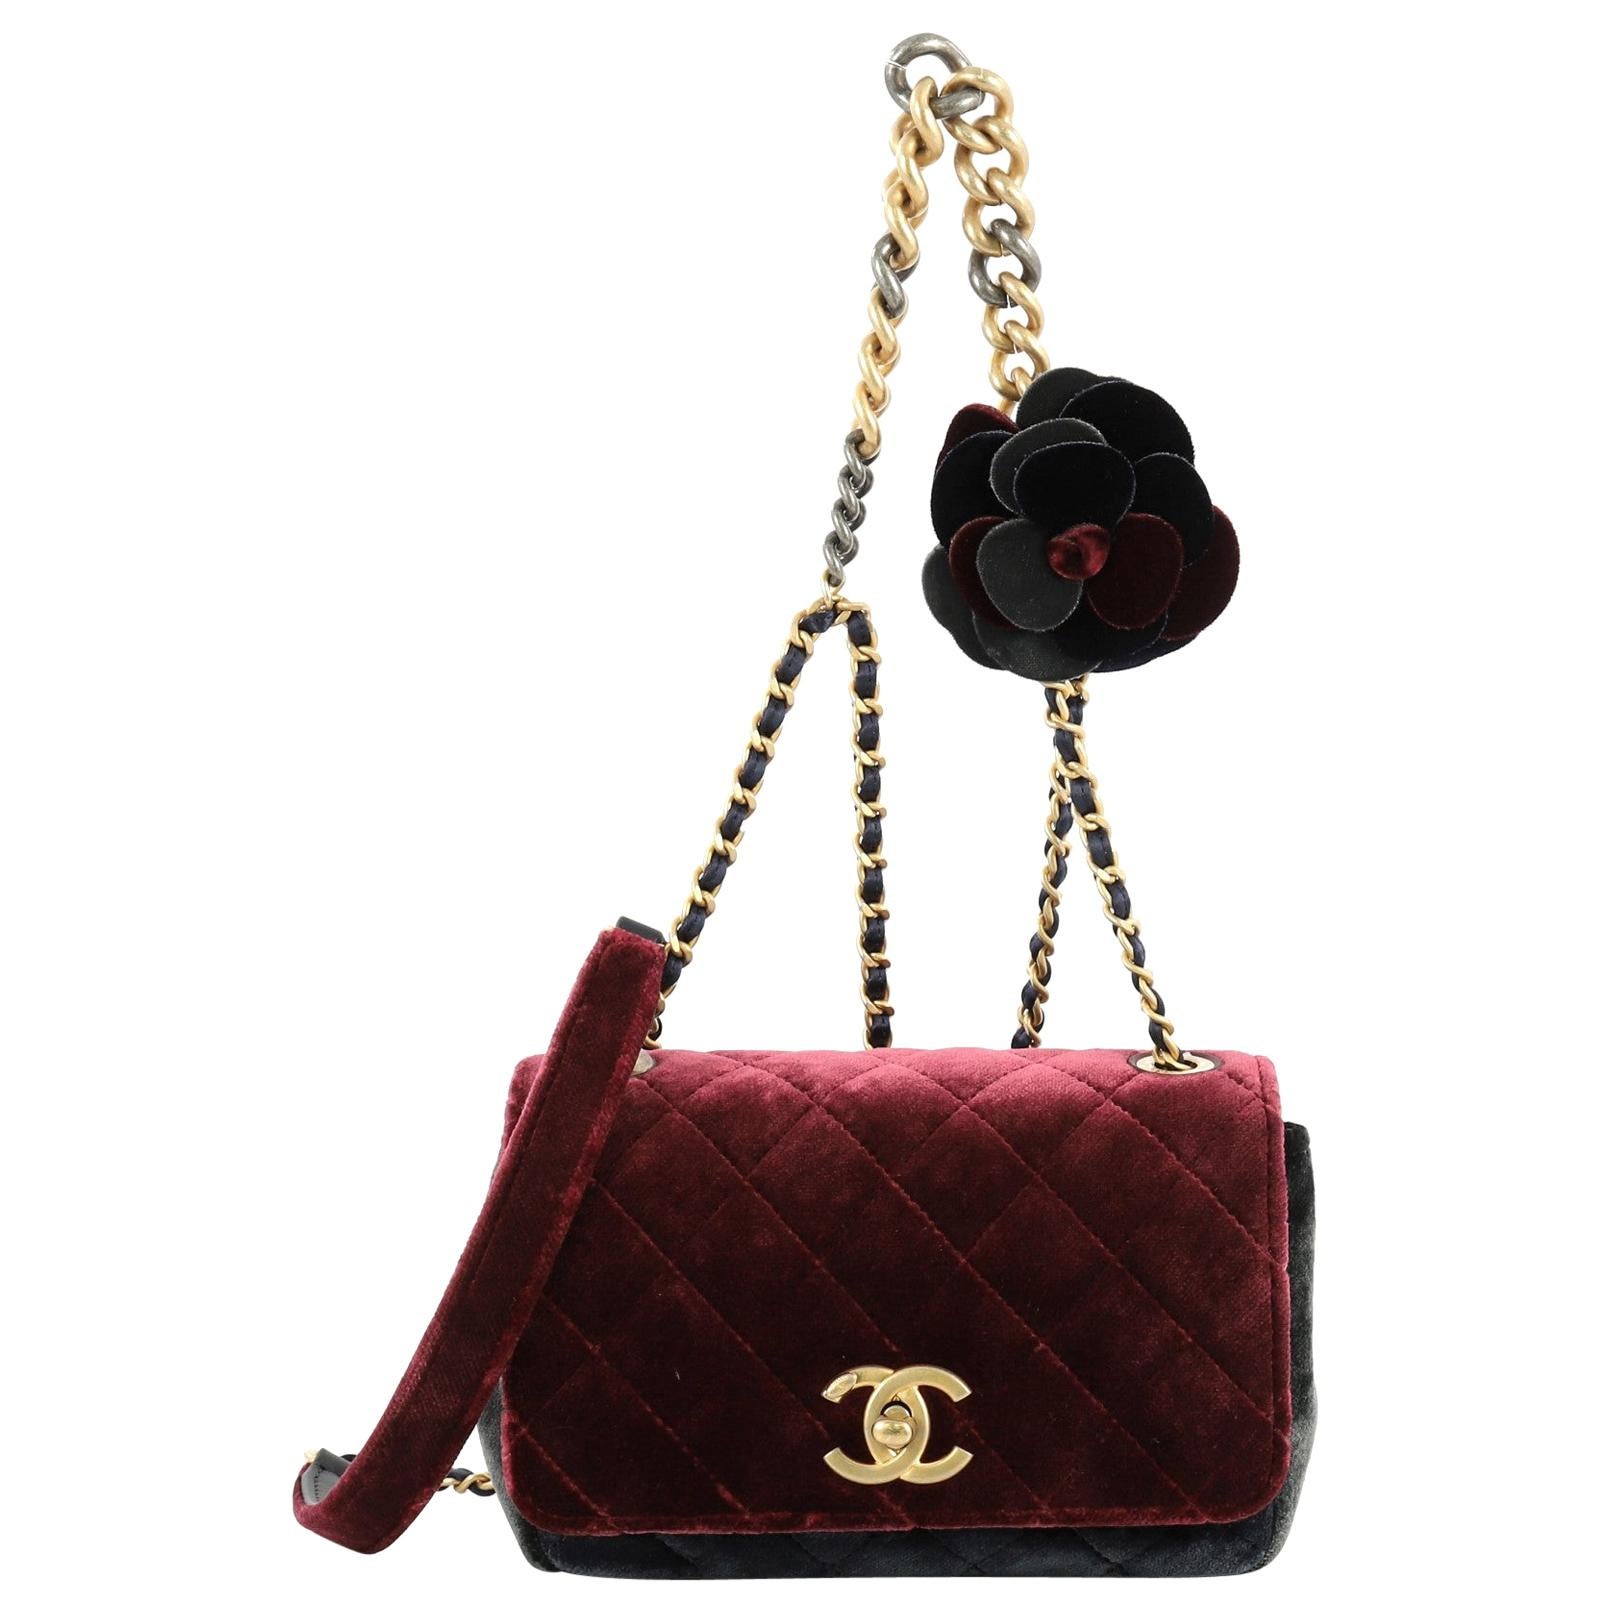 Chanel Camellia Clutch With Chain